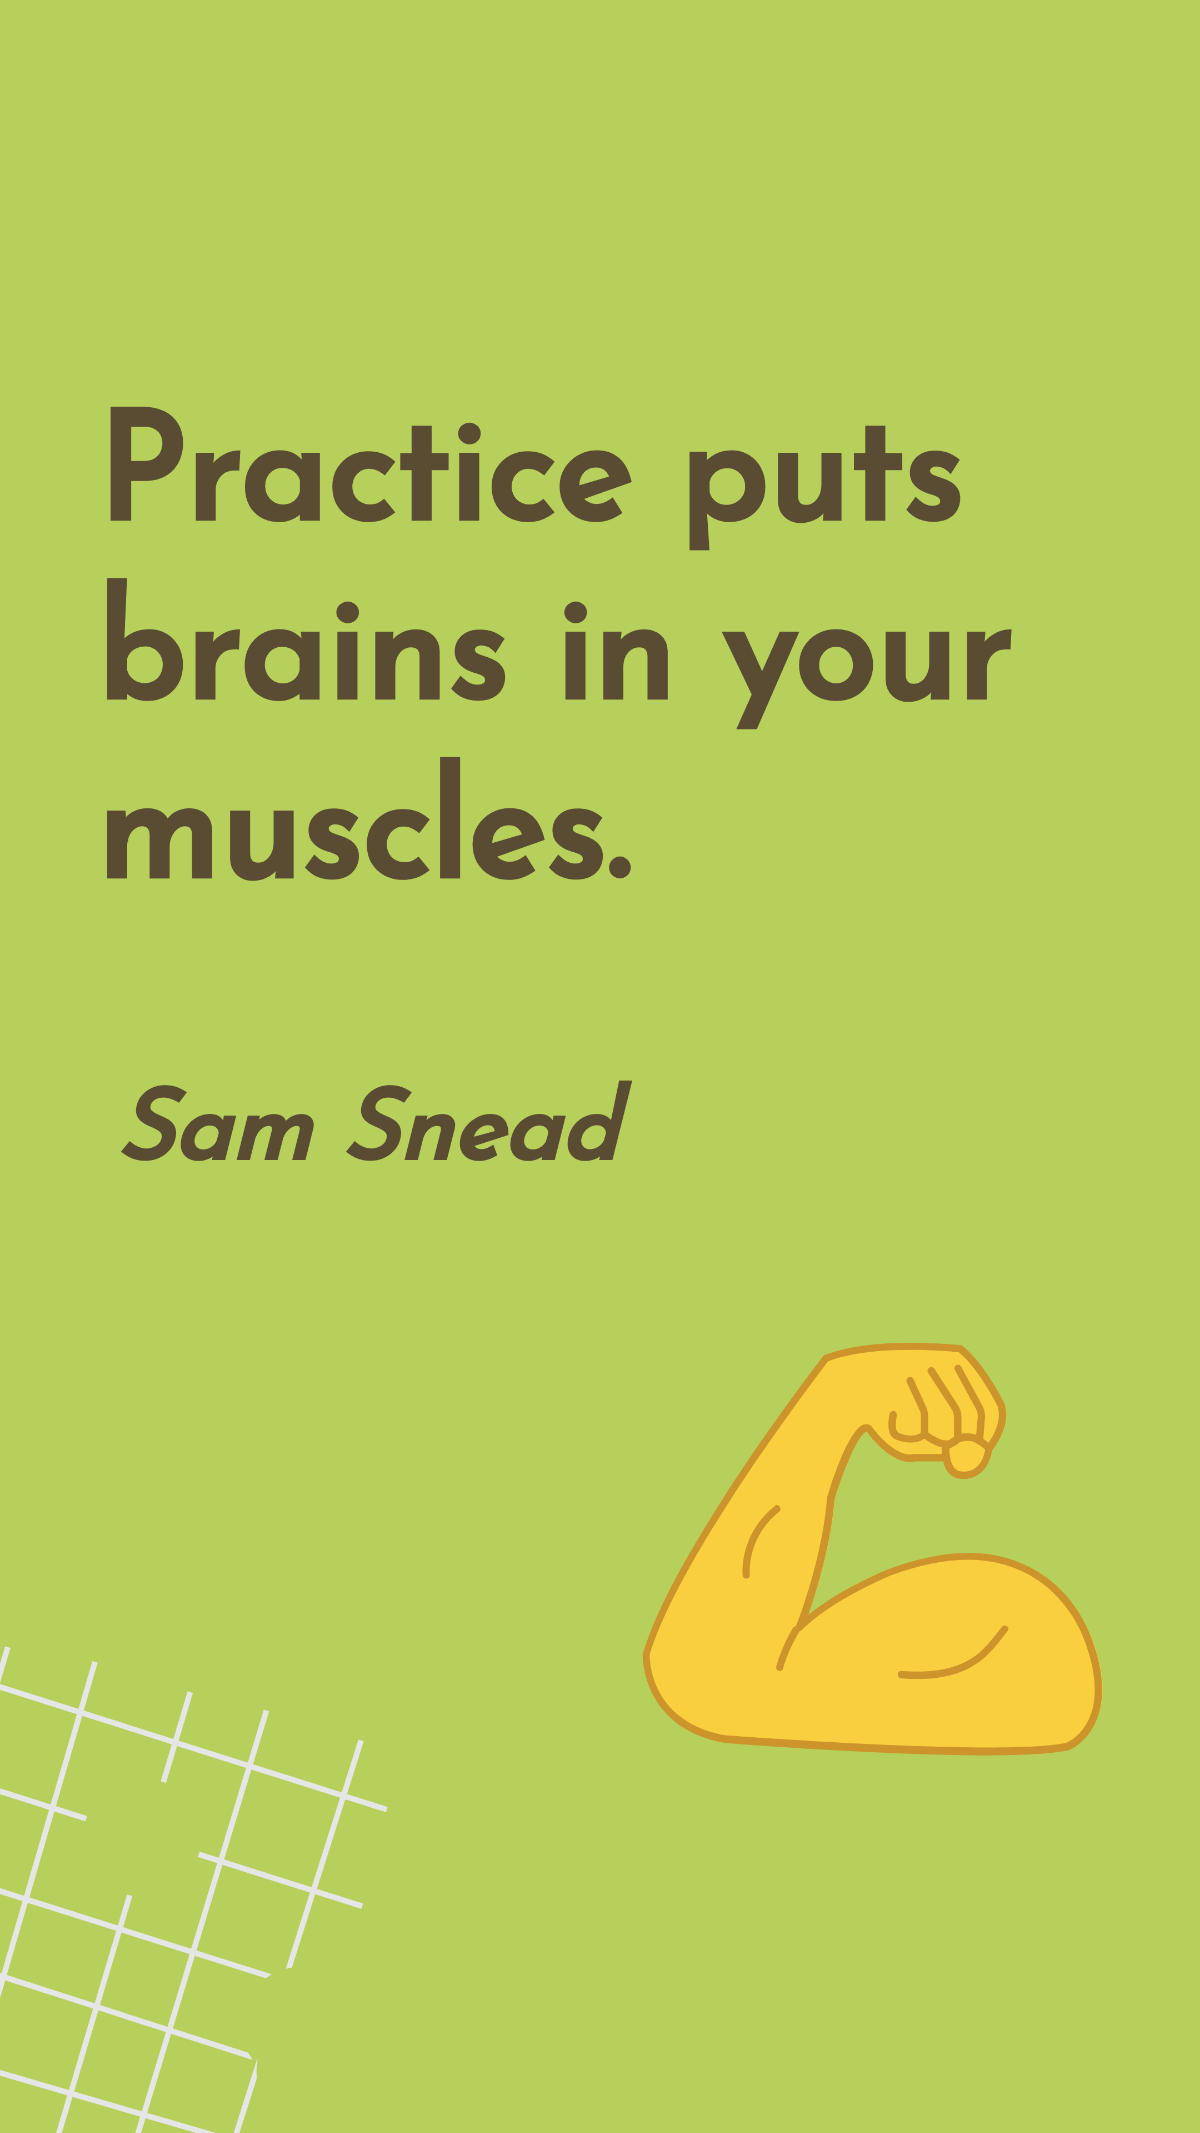 Sam Snead - Practice puts brains in your muscles.